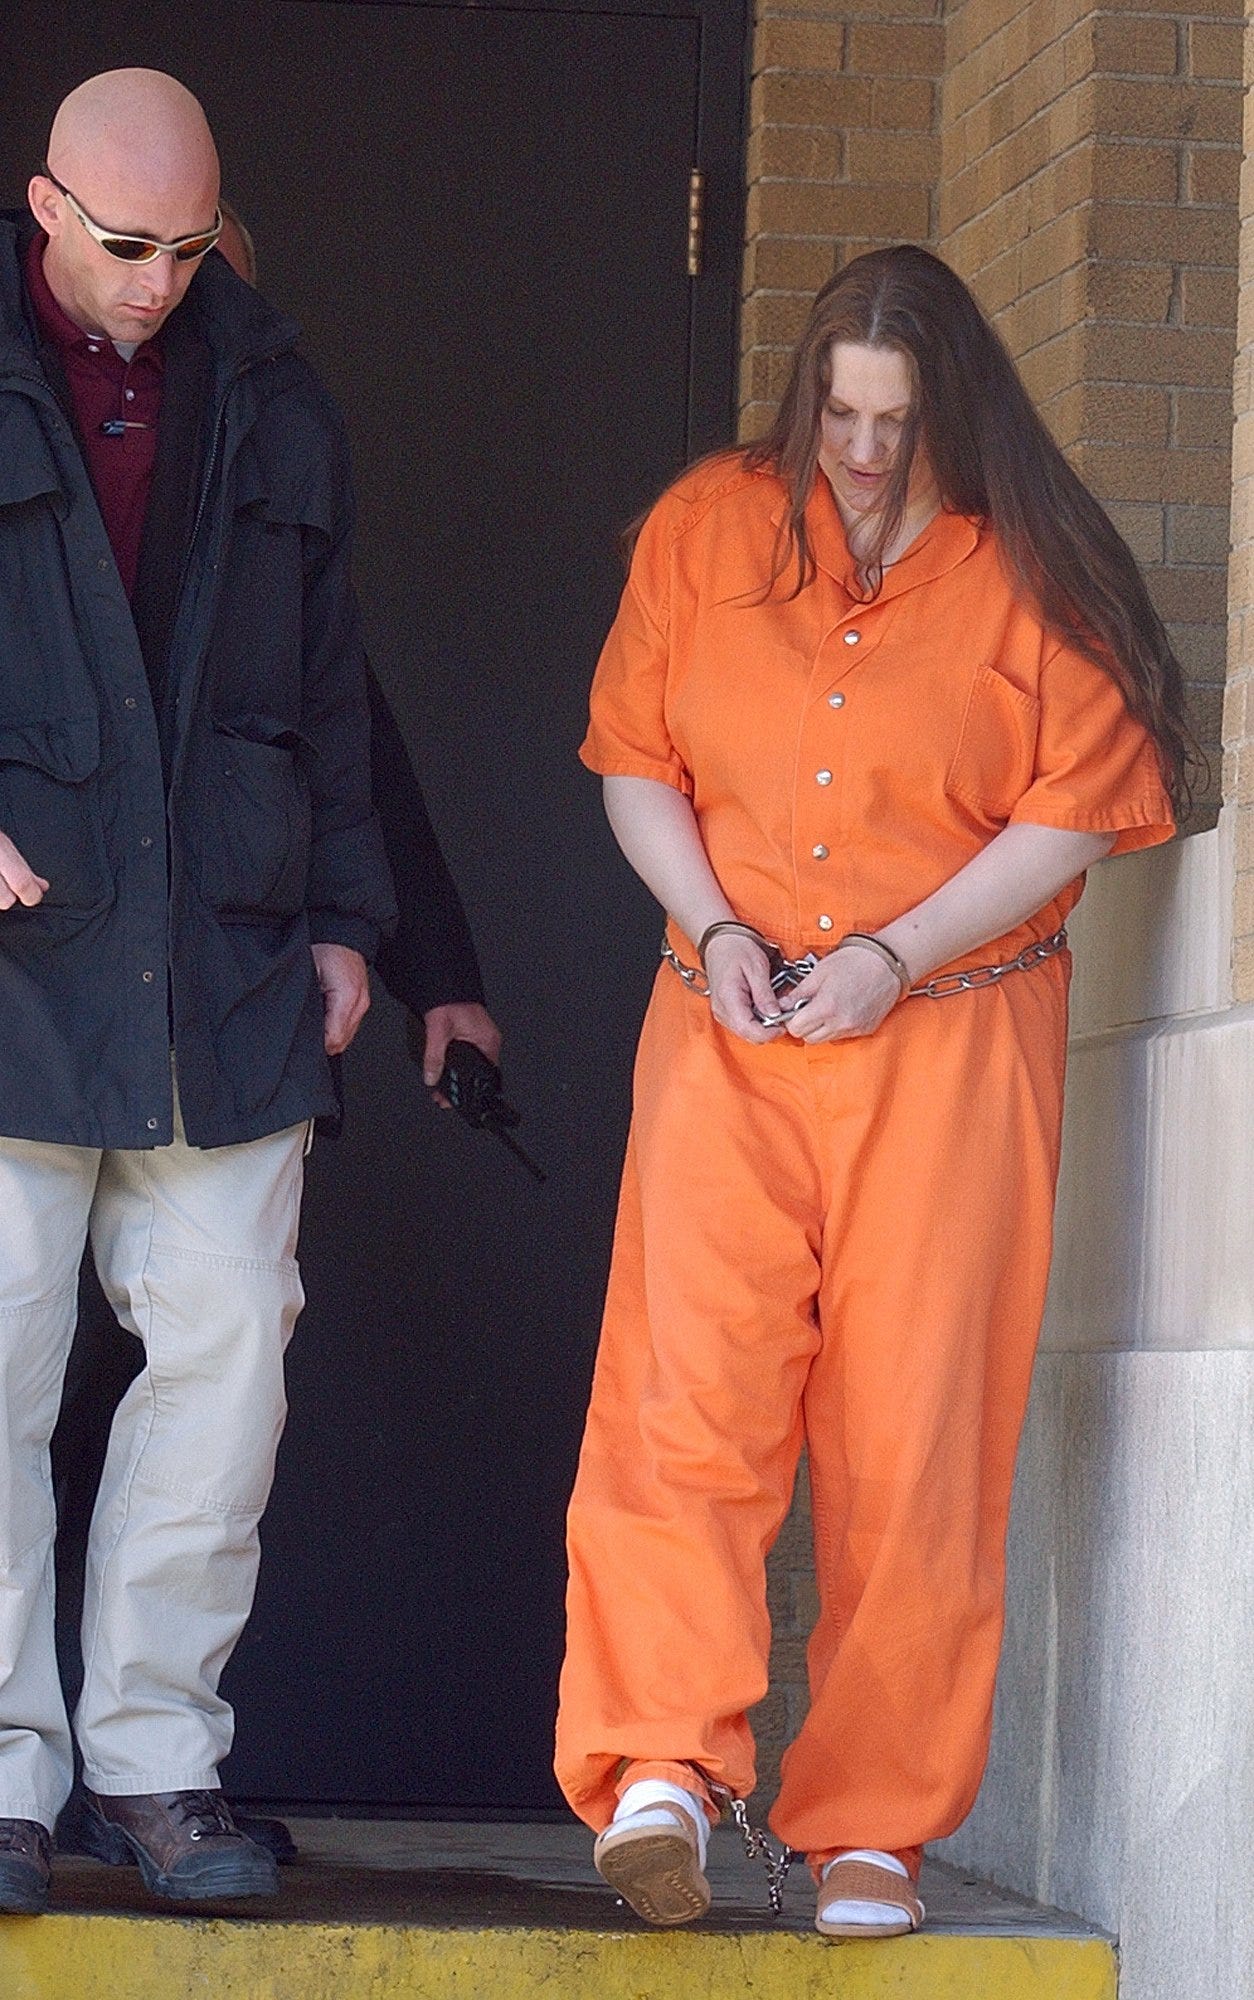 Angela Johnson is led from the U.S. Federal Building in Sioux City, Iowa, after a hearing Feb. 11, 2005.